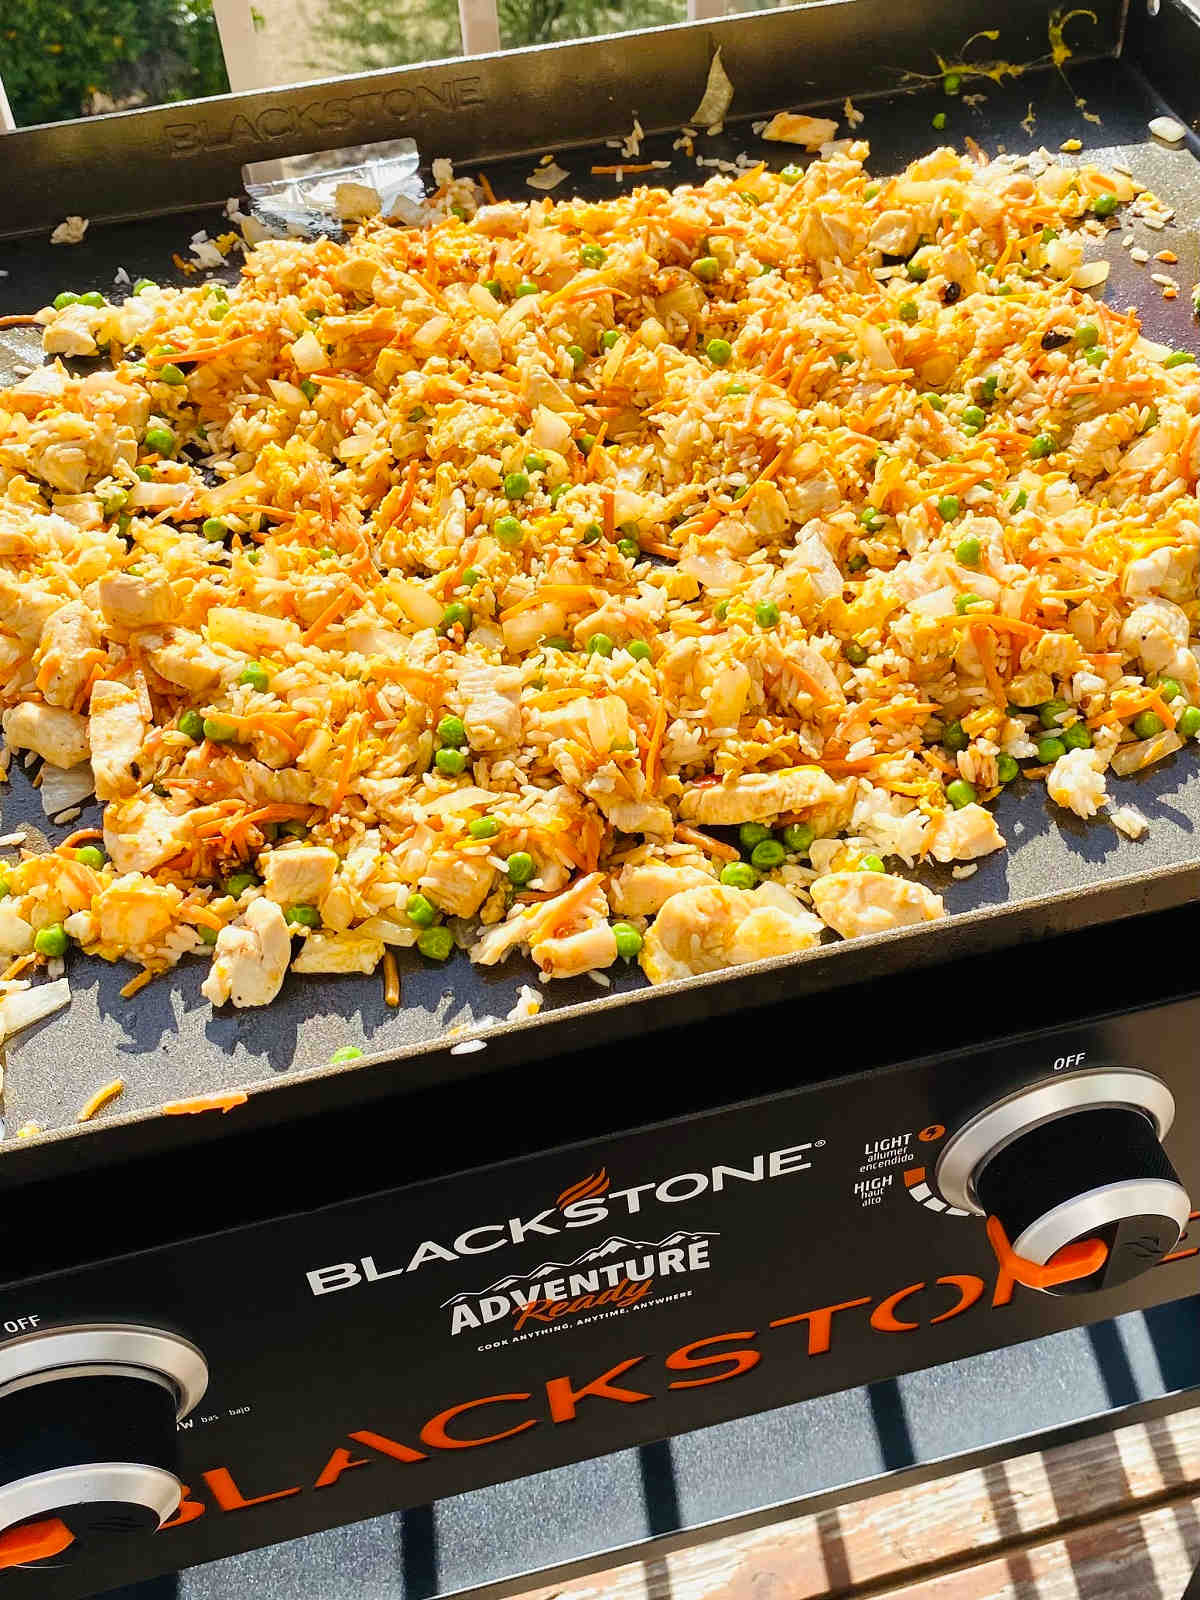 Fried rice being cooked on a blackstone griddle.